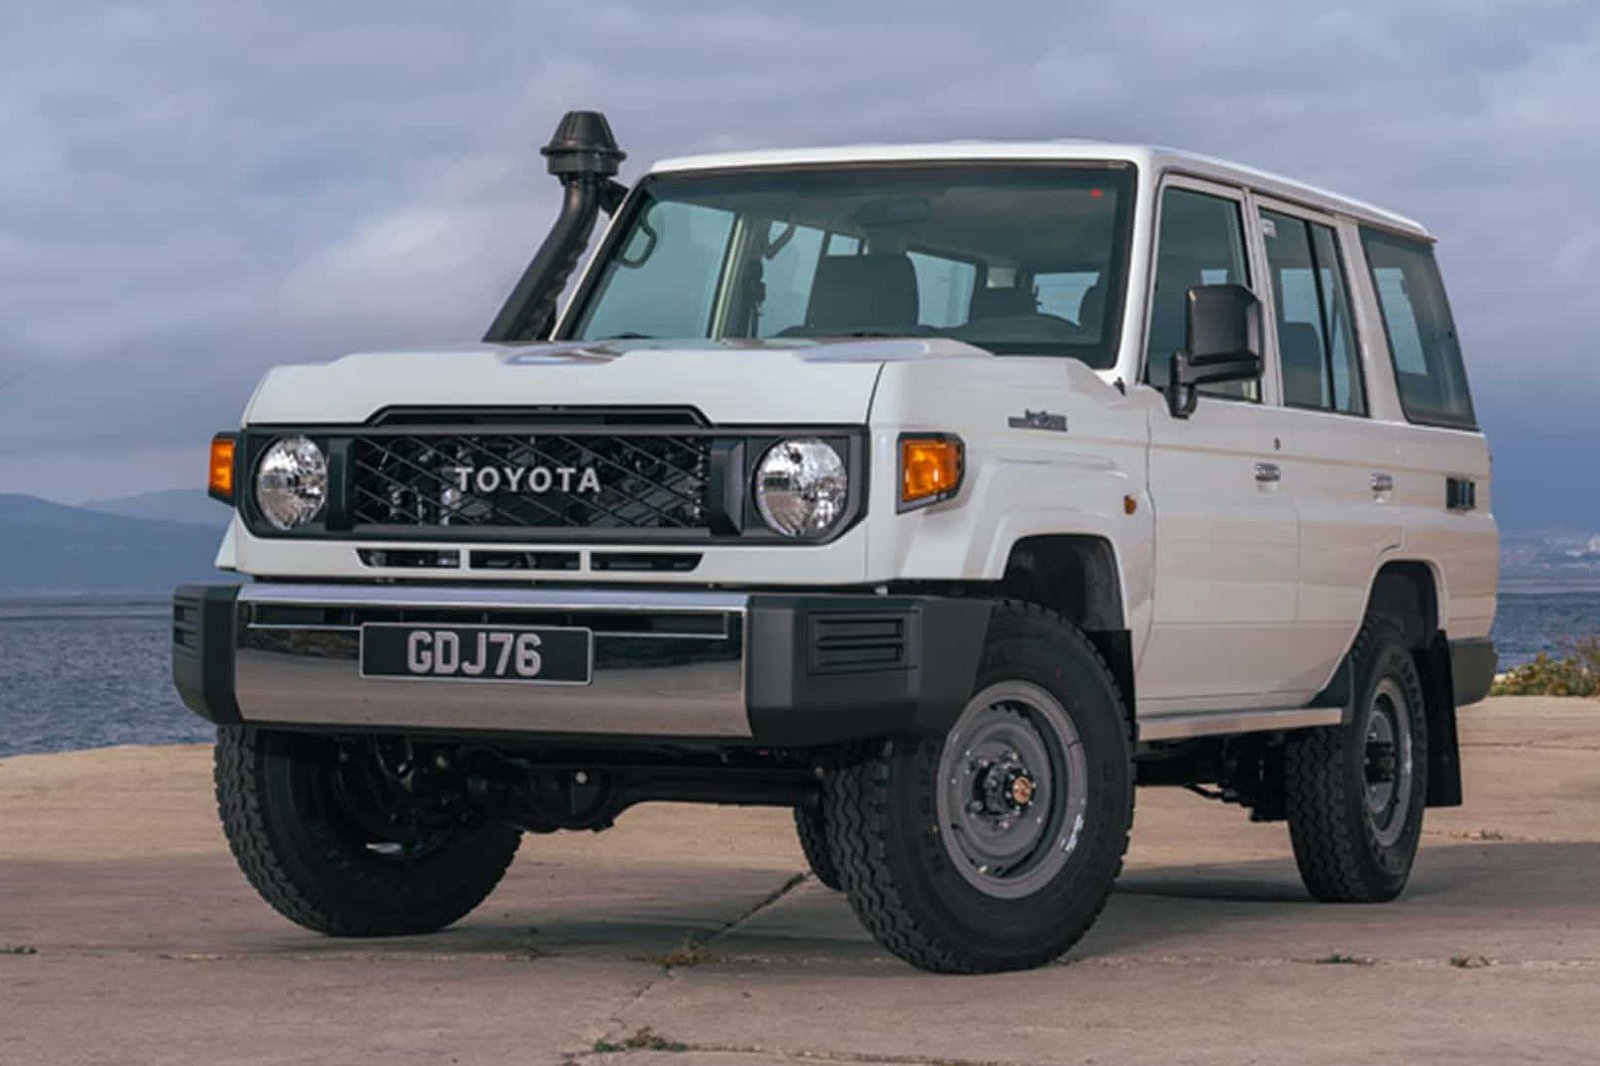 Toyota Land Cruiser GDJ76 Unveiled As New United Nations Company Car